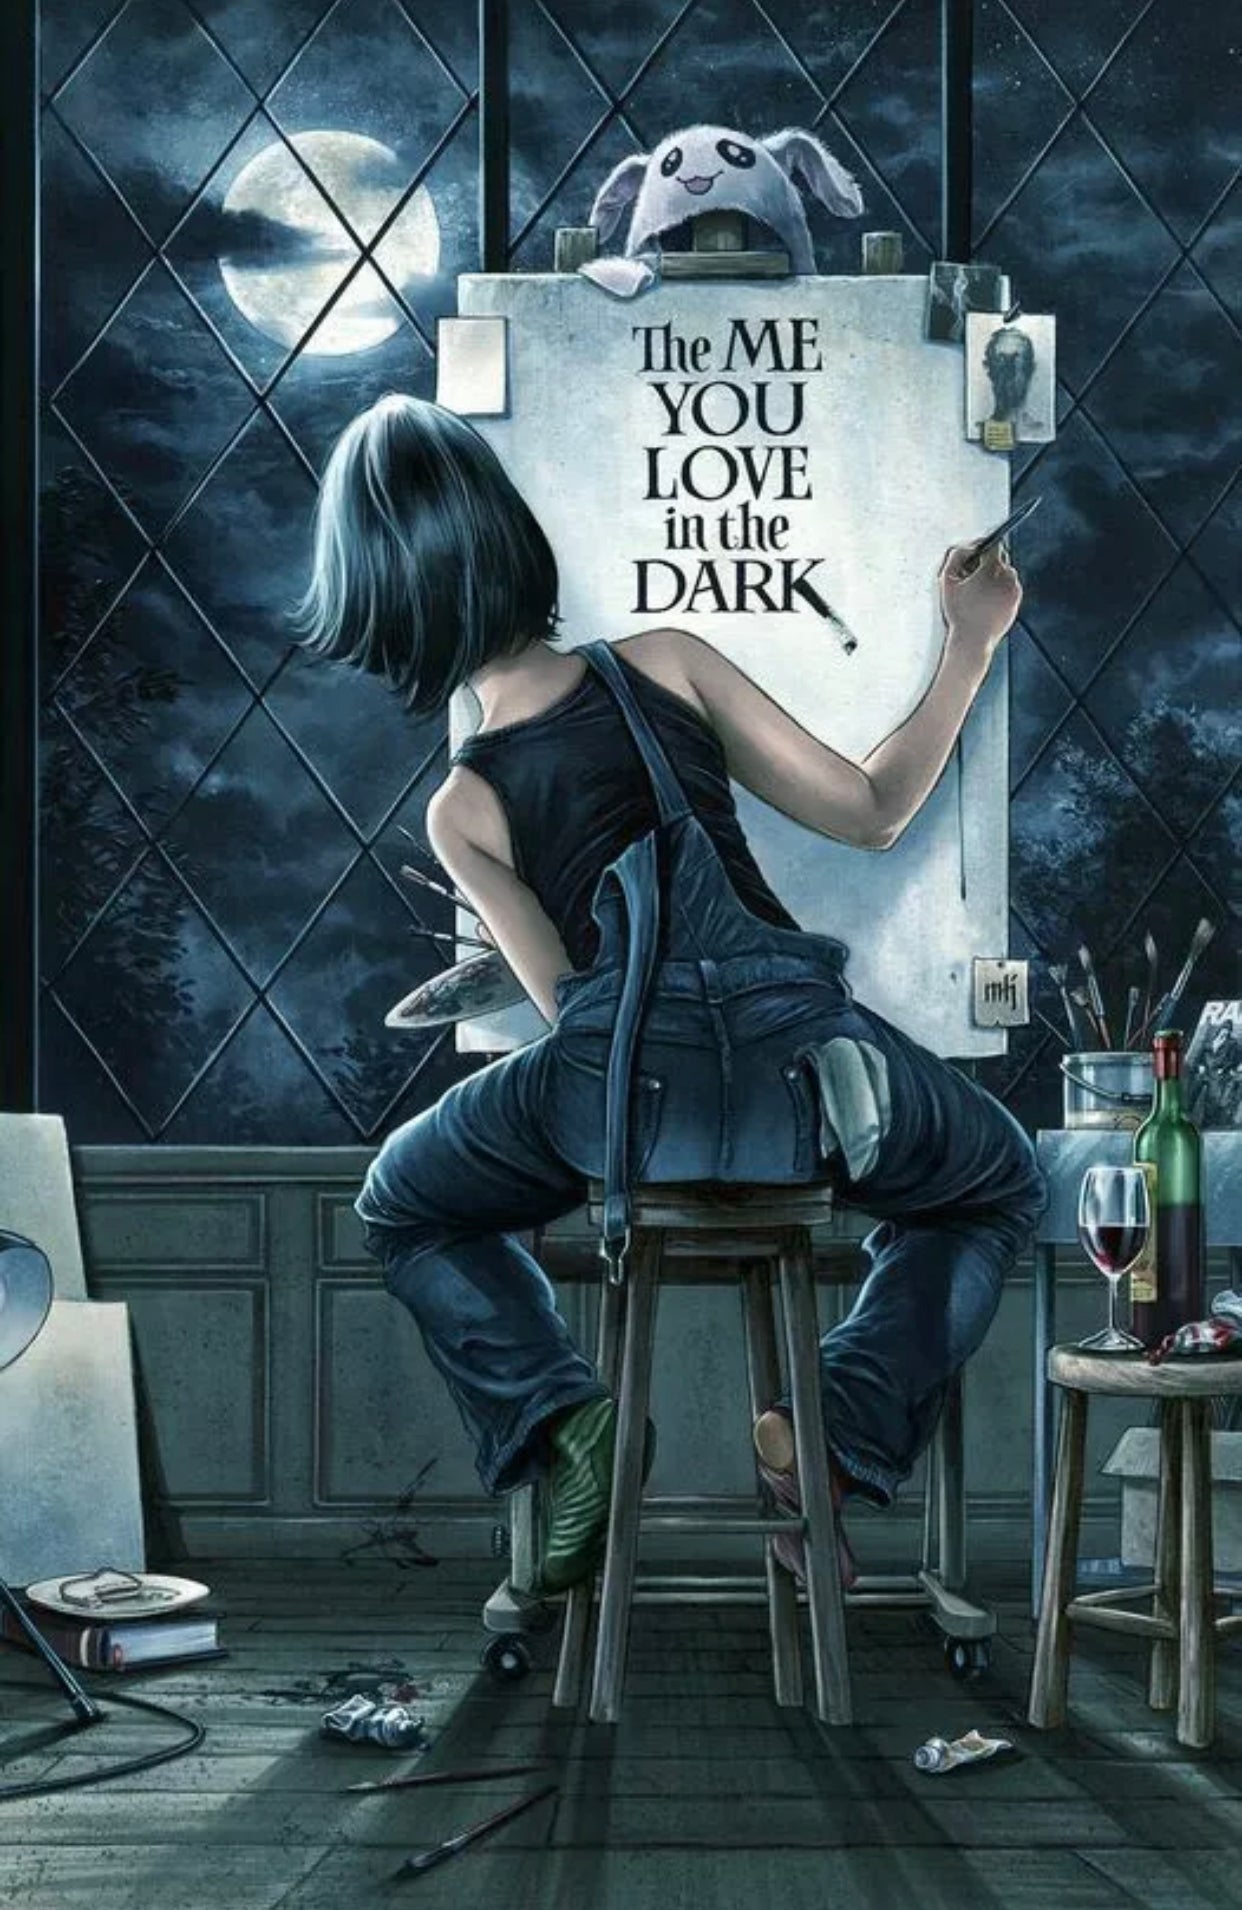 THE ME YOU LOVE IN THE DARK #1 MIKE KROME Rockwell Homage Variant LTD 500